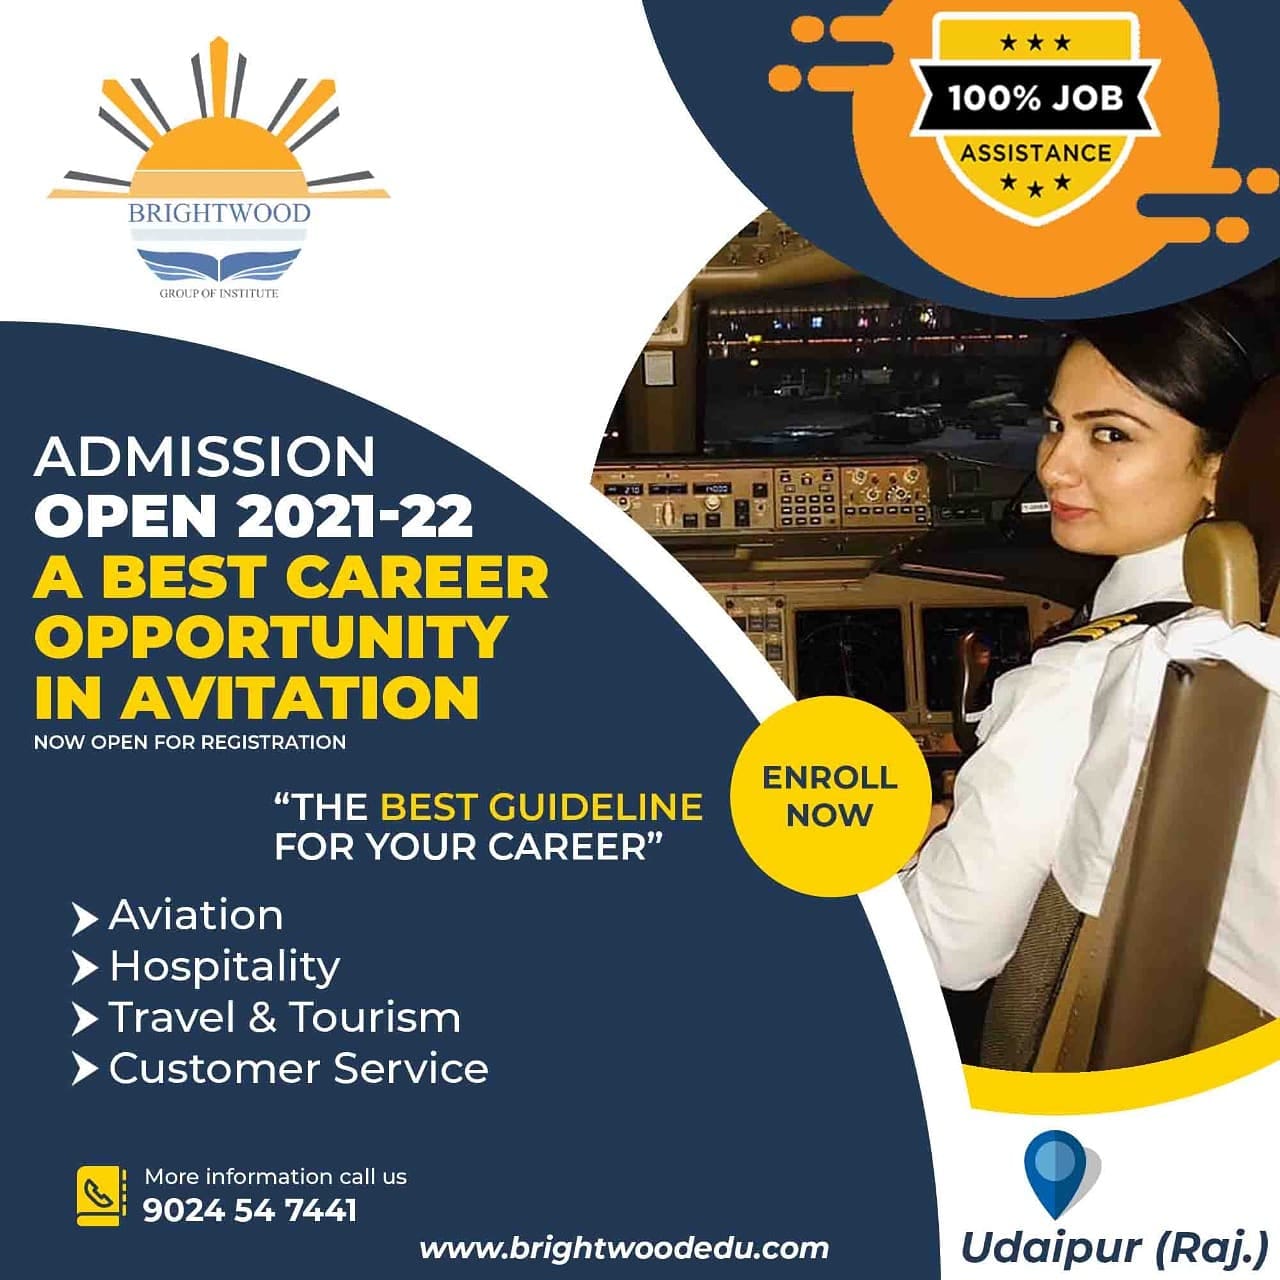 Bsc. in Aviation management course in udaipur, Rajasthan